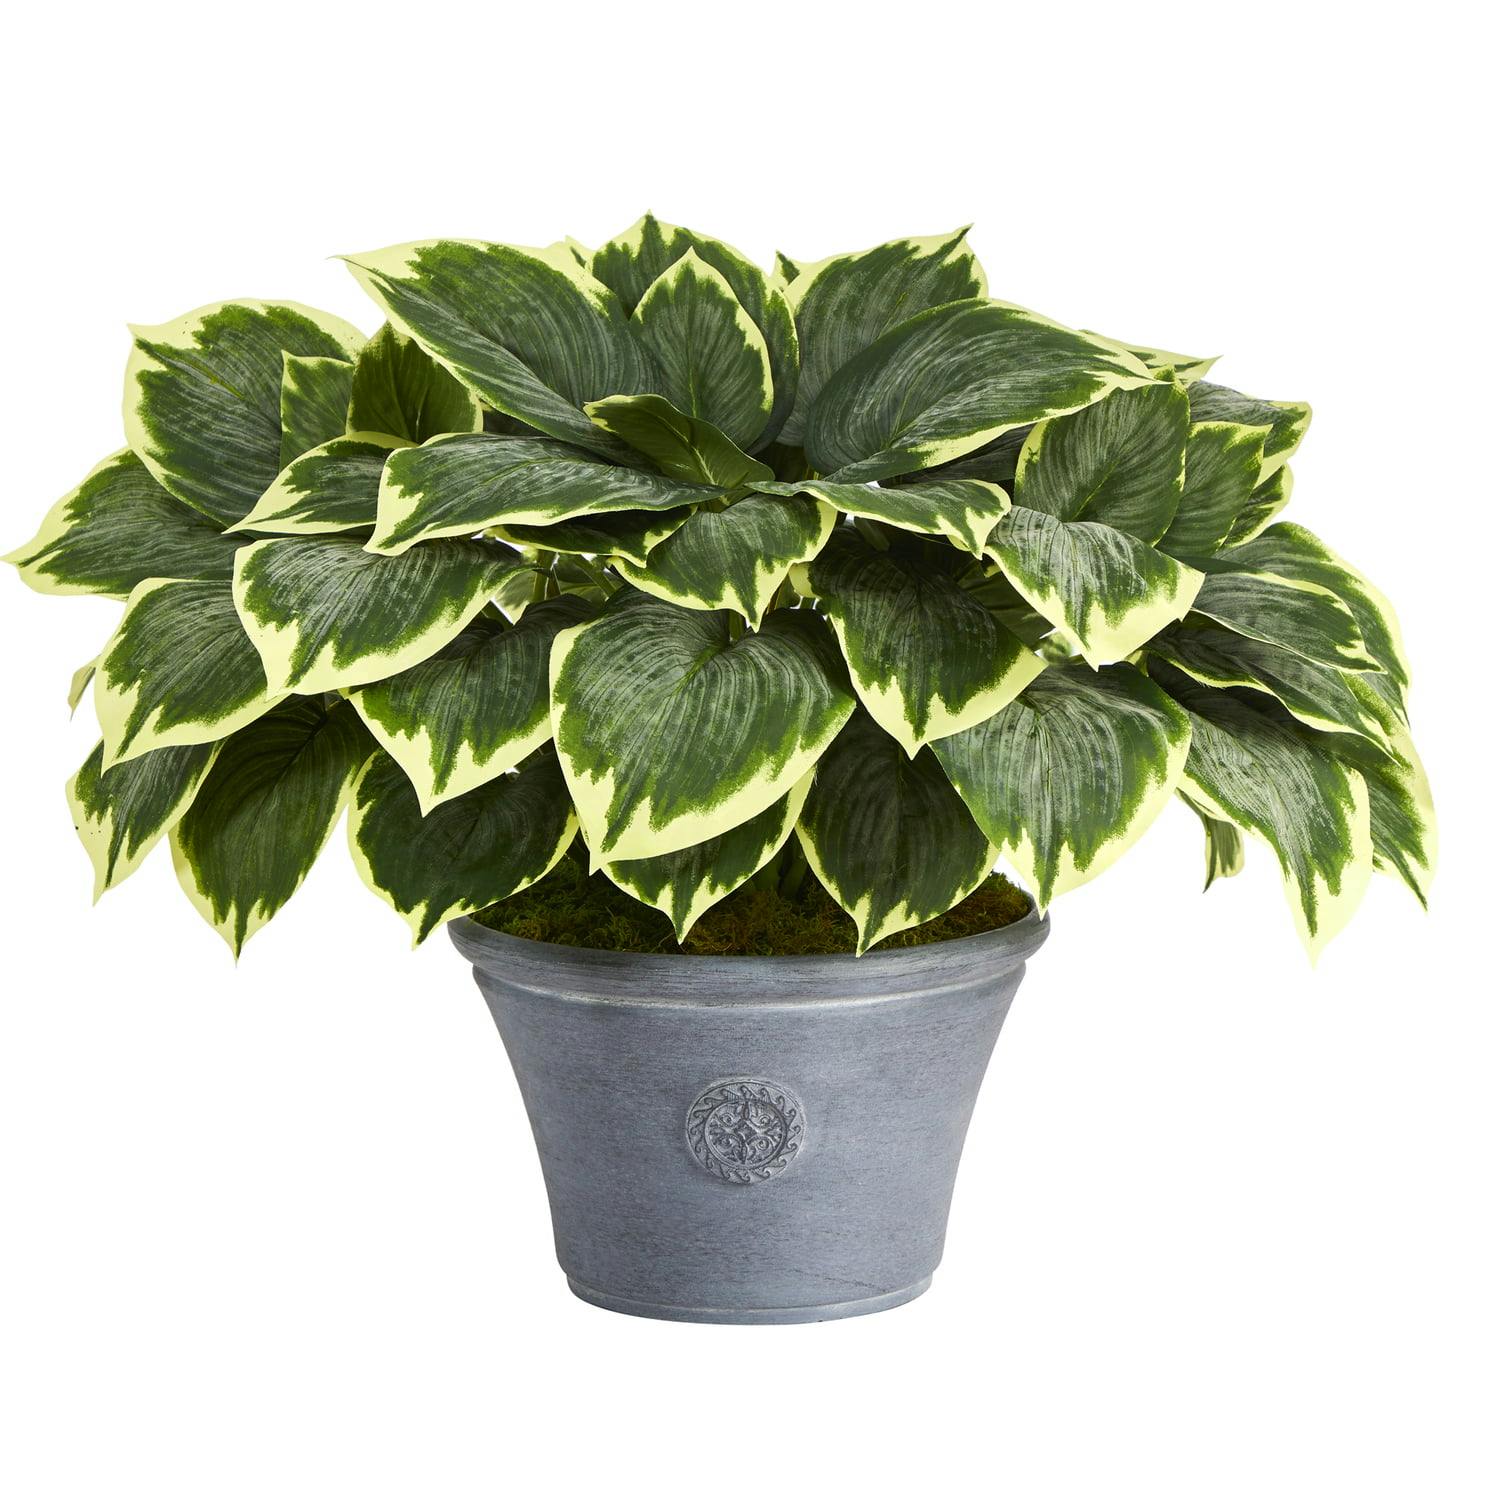 Variegated Hosta 23" Artificial Plant in Gray Planter